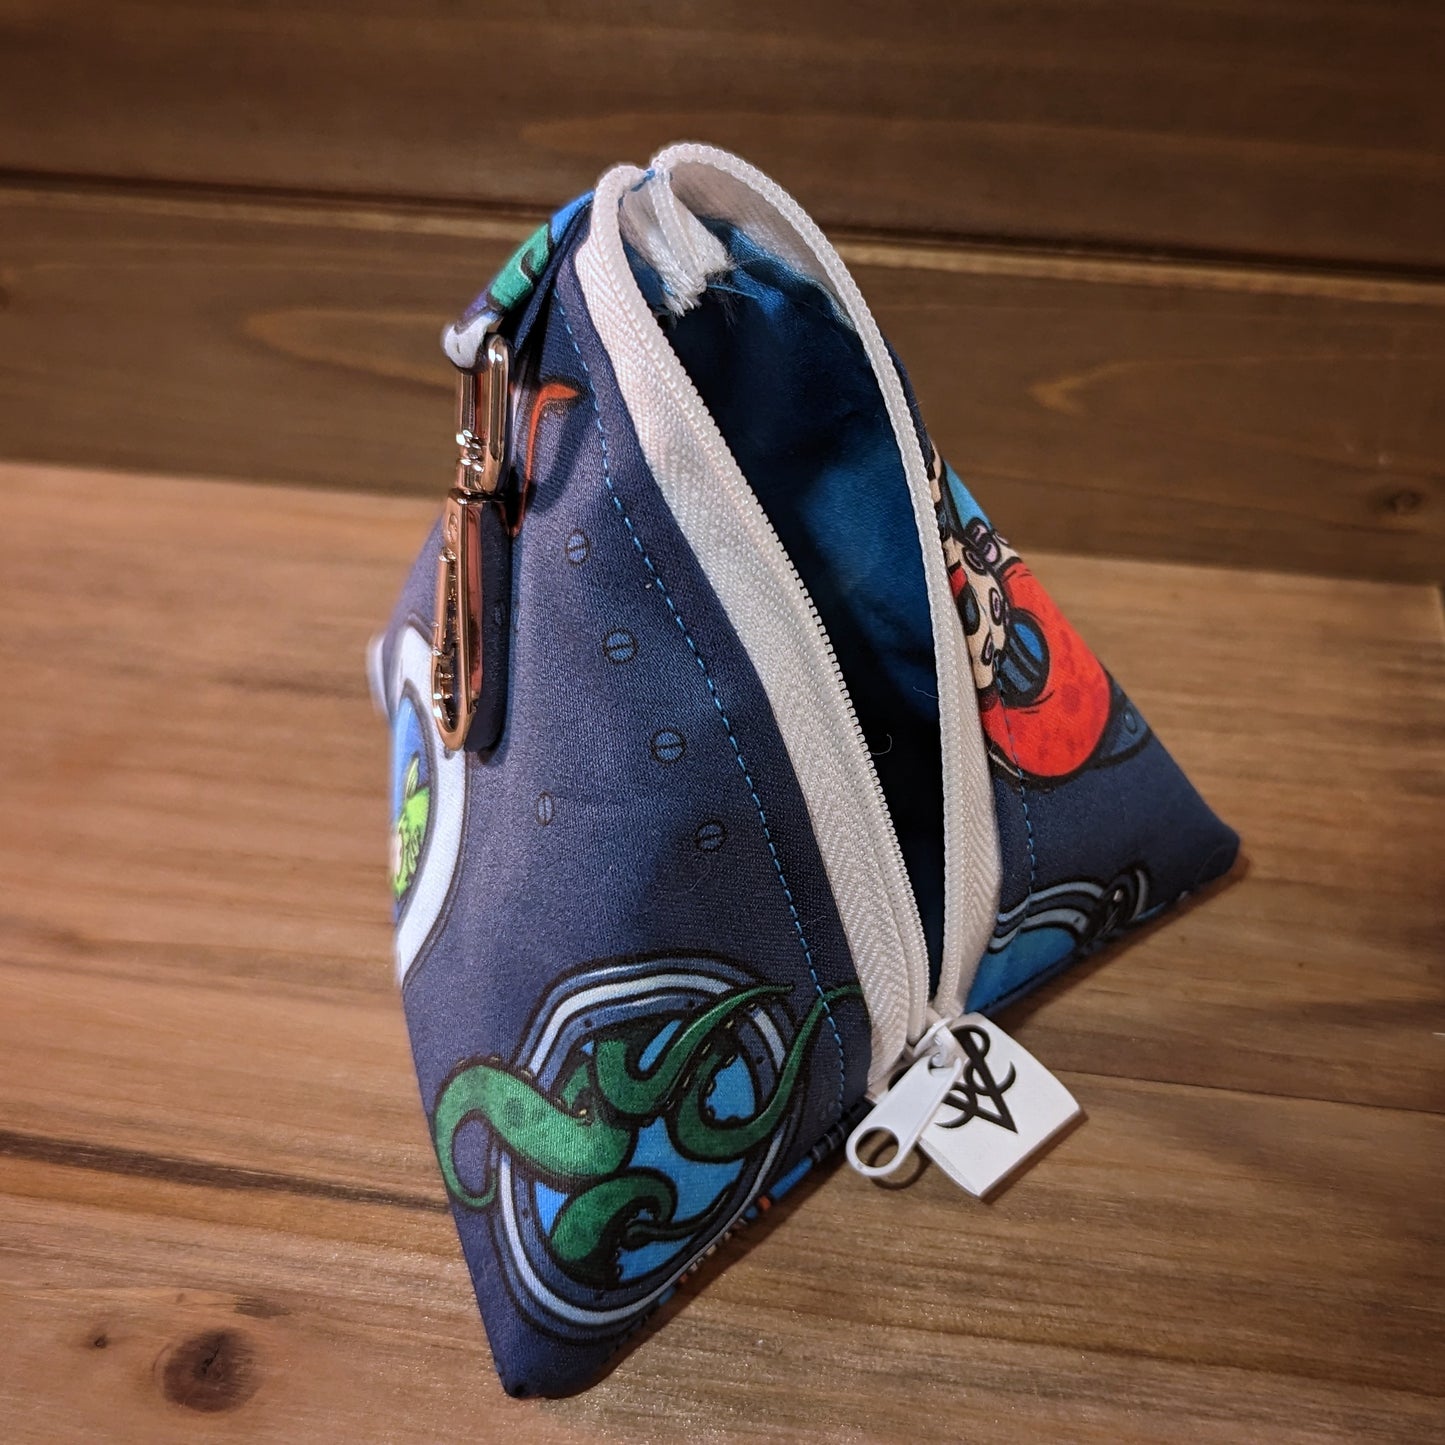 A 5 inch D4 bag has an print that looks like the inside of a submarine with tentacles breaching portholes near a nervous looking fish, a white zipper, and a keychain clip.